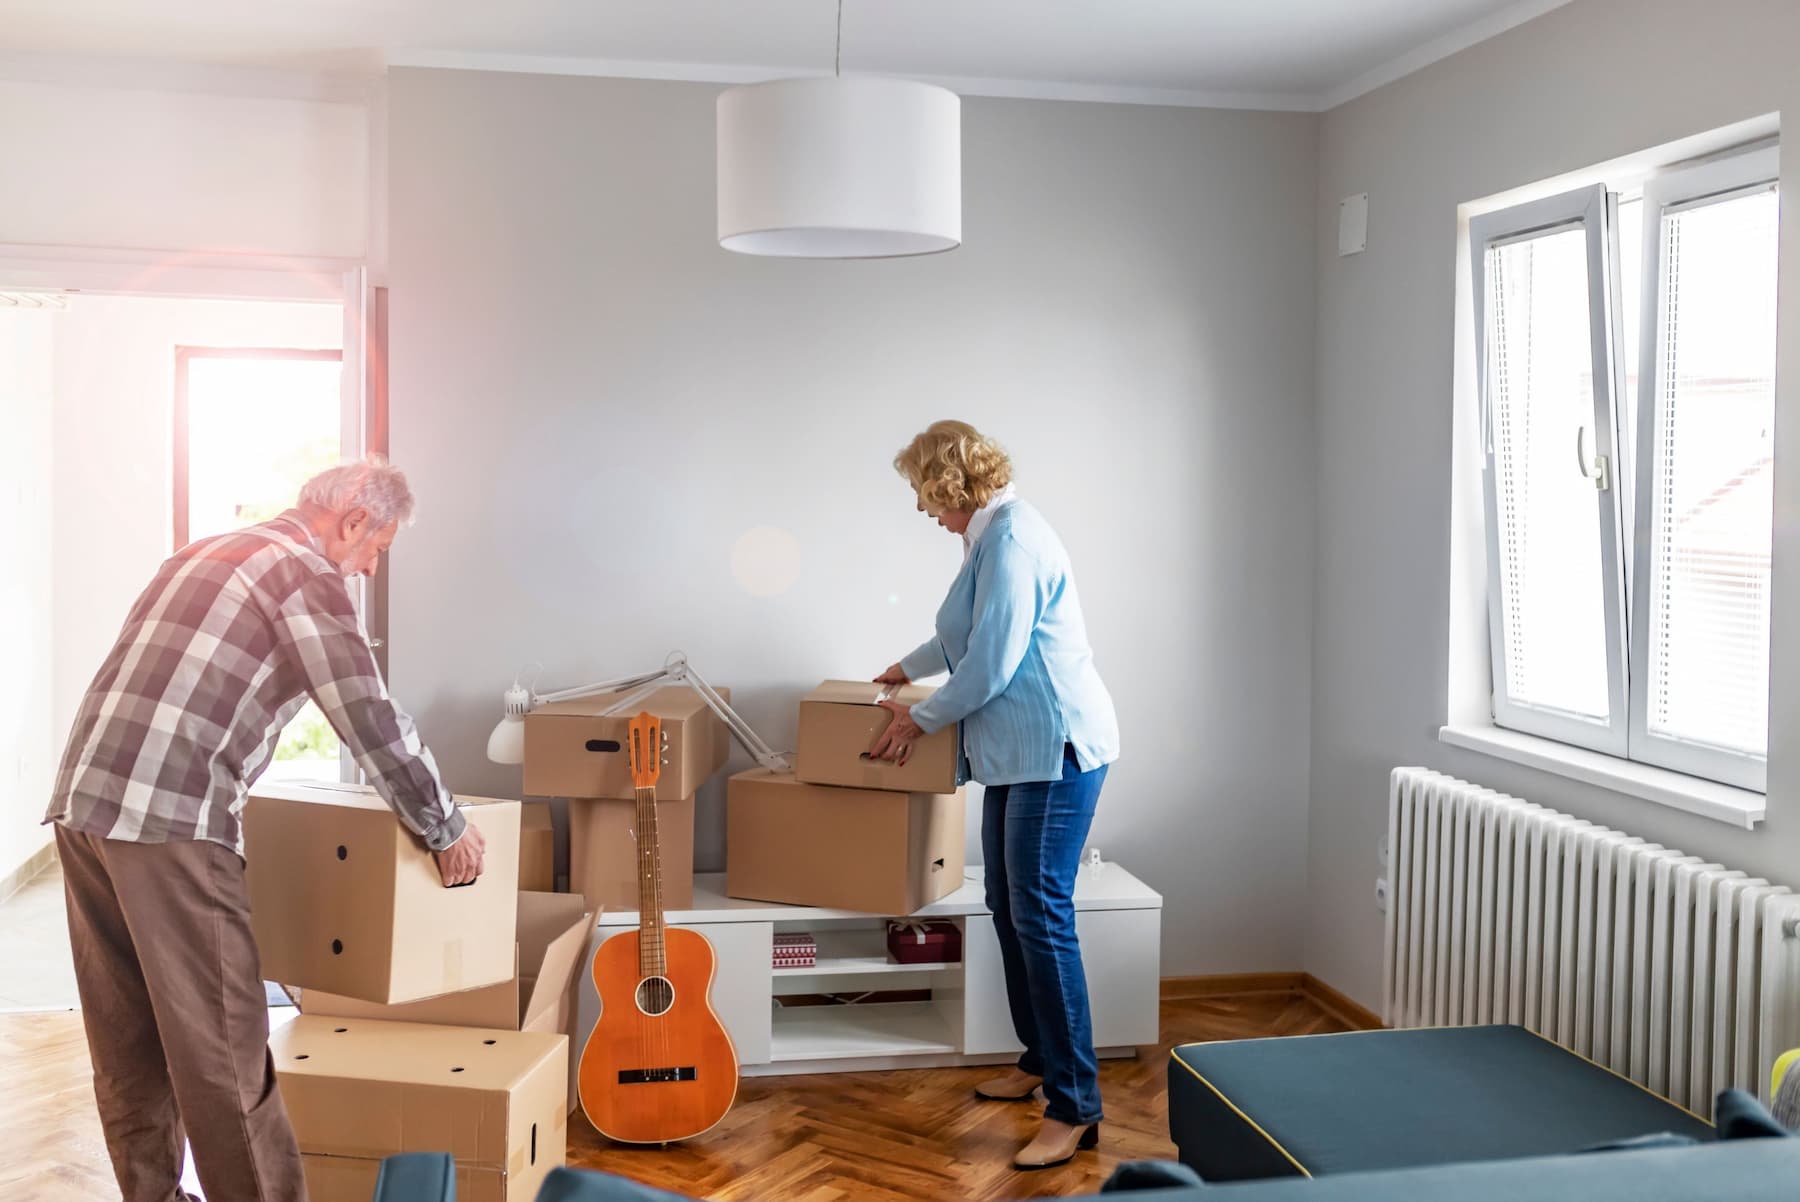 An elderly couple packing to move. Downsizing report for seniors